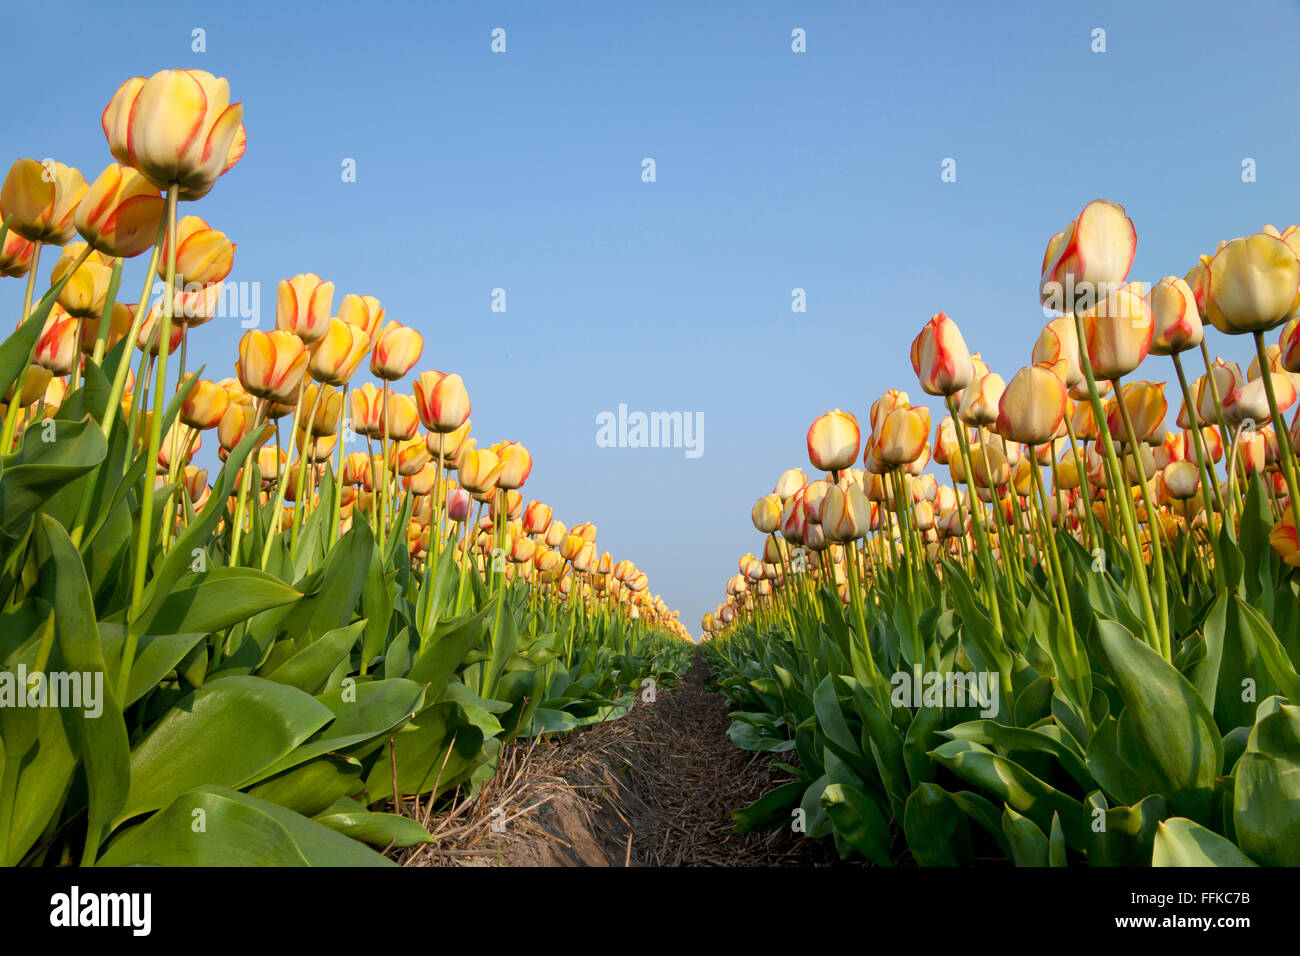 Dutch Tulip fields in springtime seen from a low angle Stock Photo